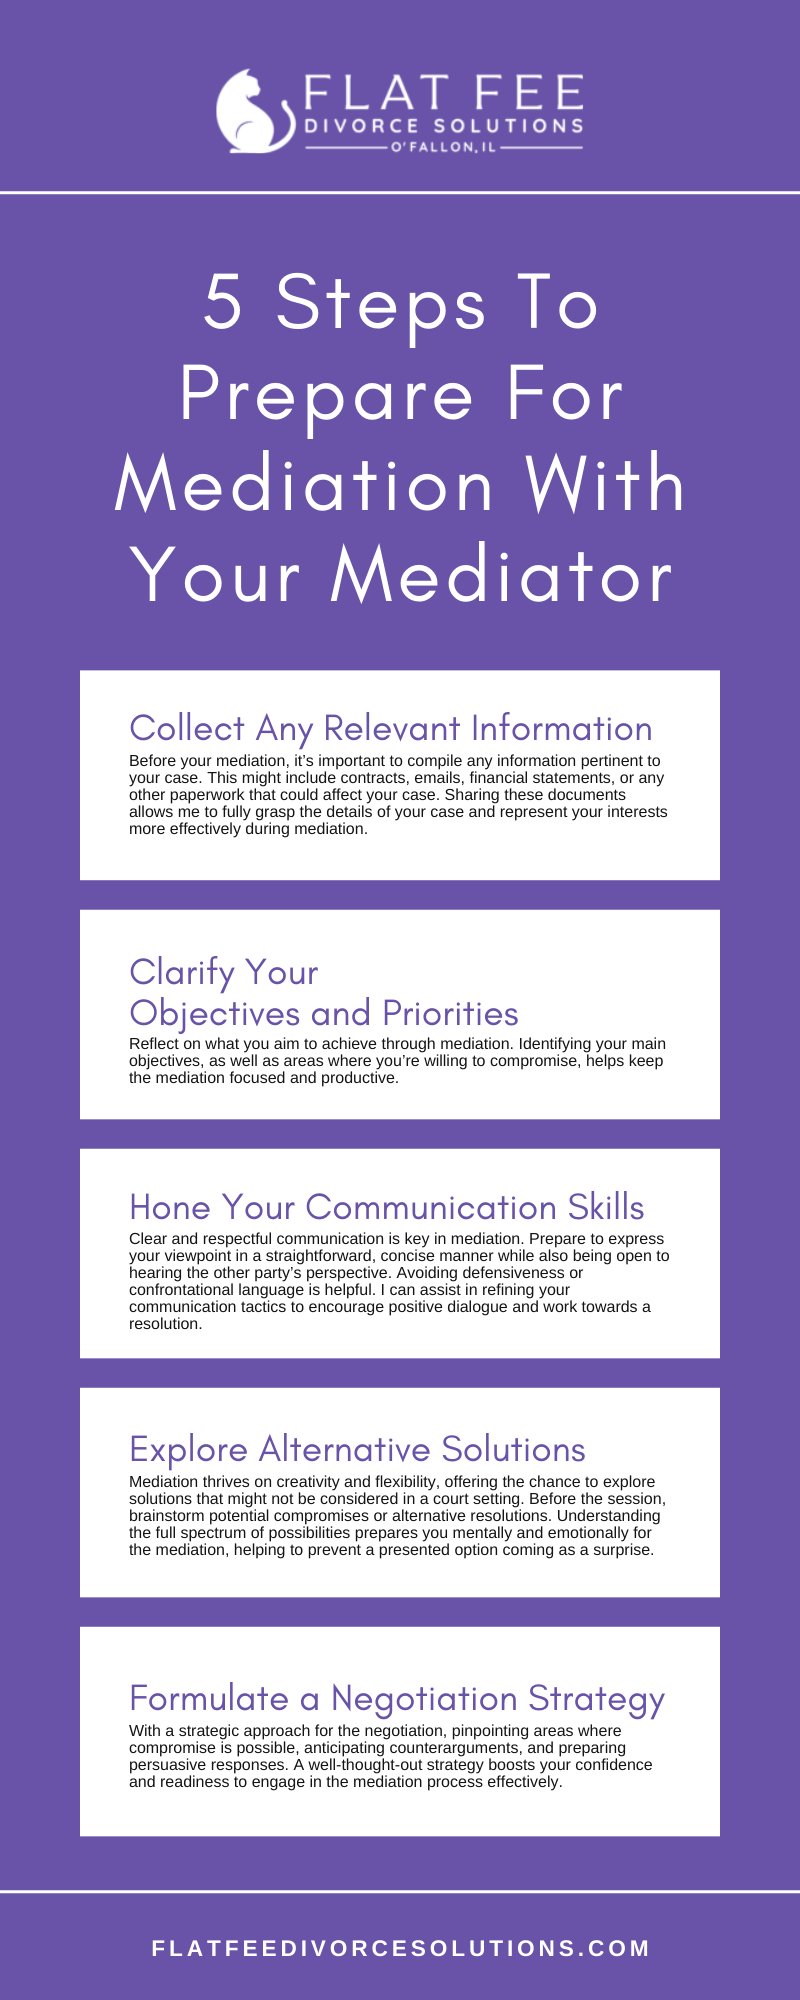 5 Steps To Prepare For Mediation With Your Mediator Infographic